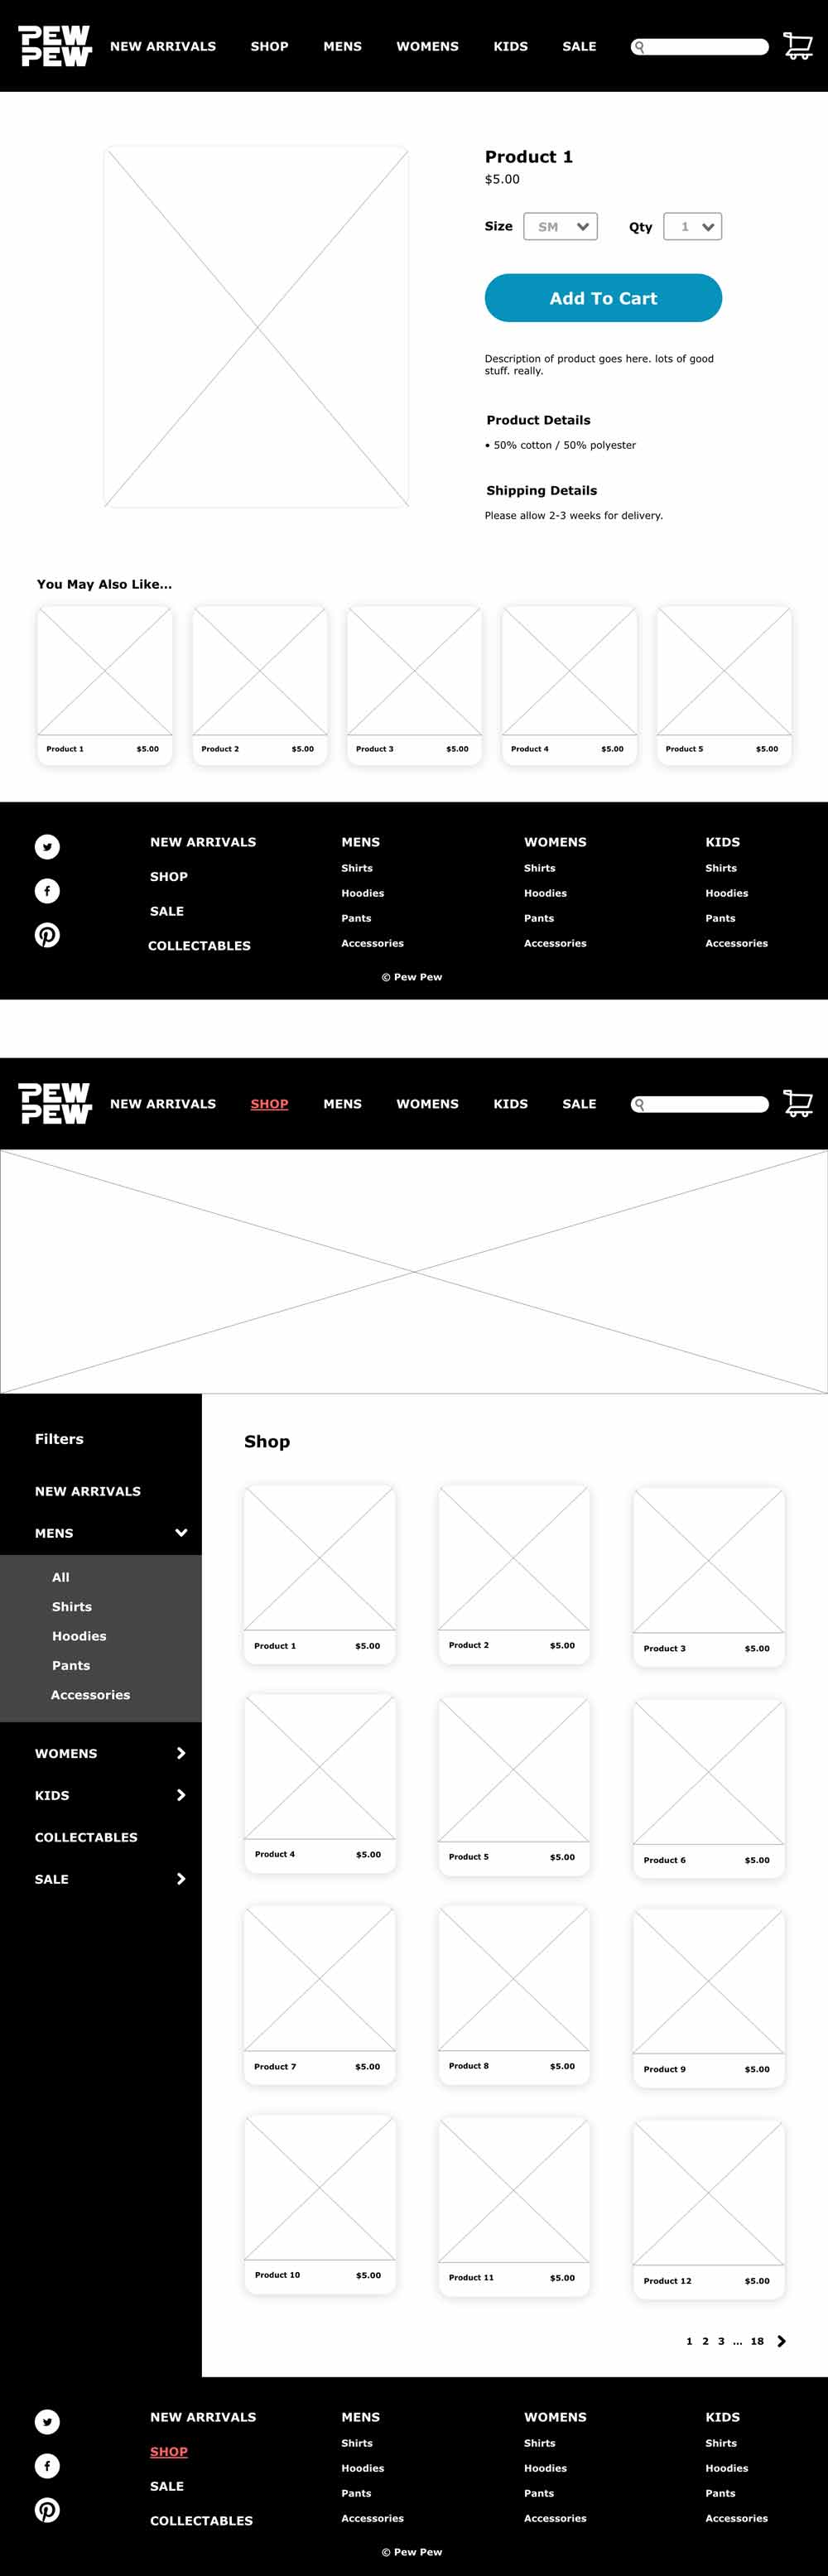 This is an image of the website wireframes. This is the layout for the general shop page and each product page.
